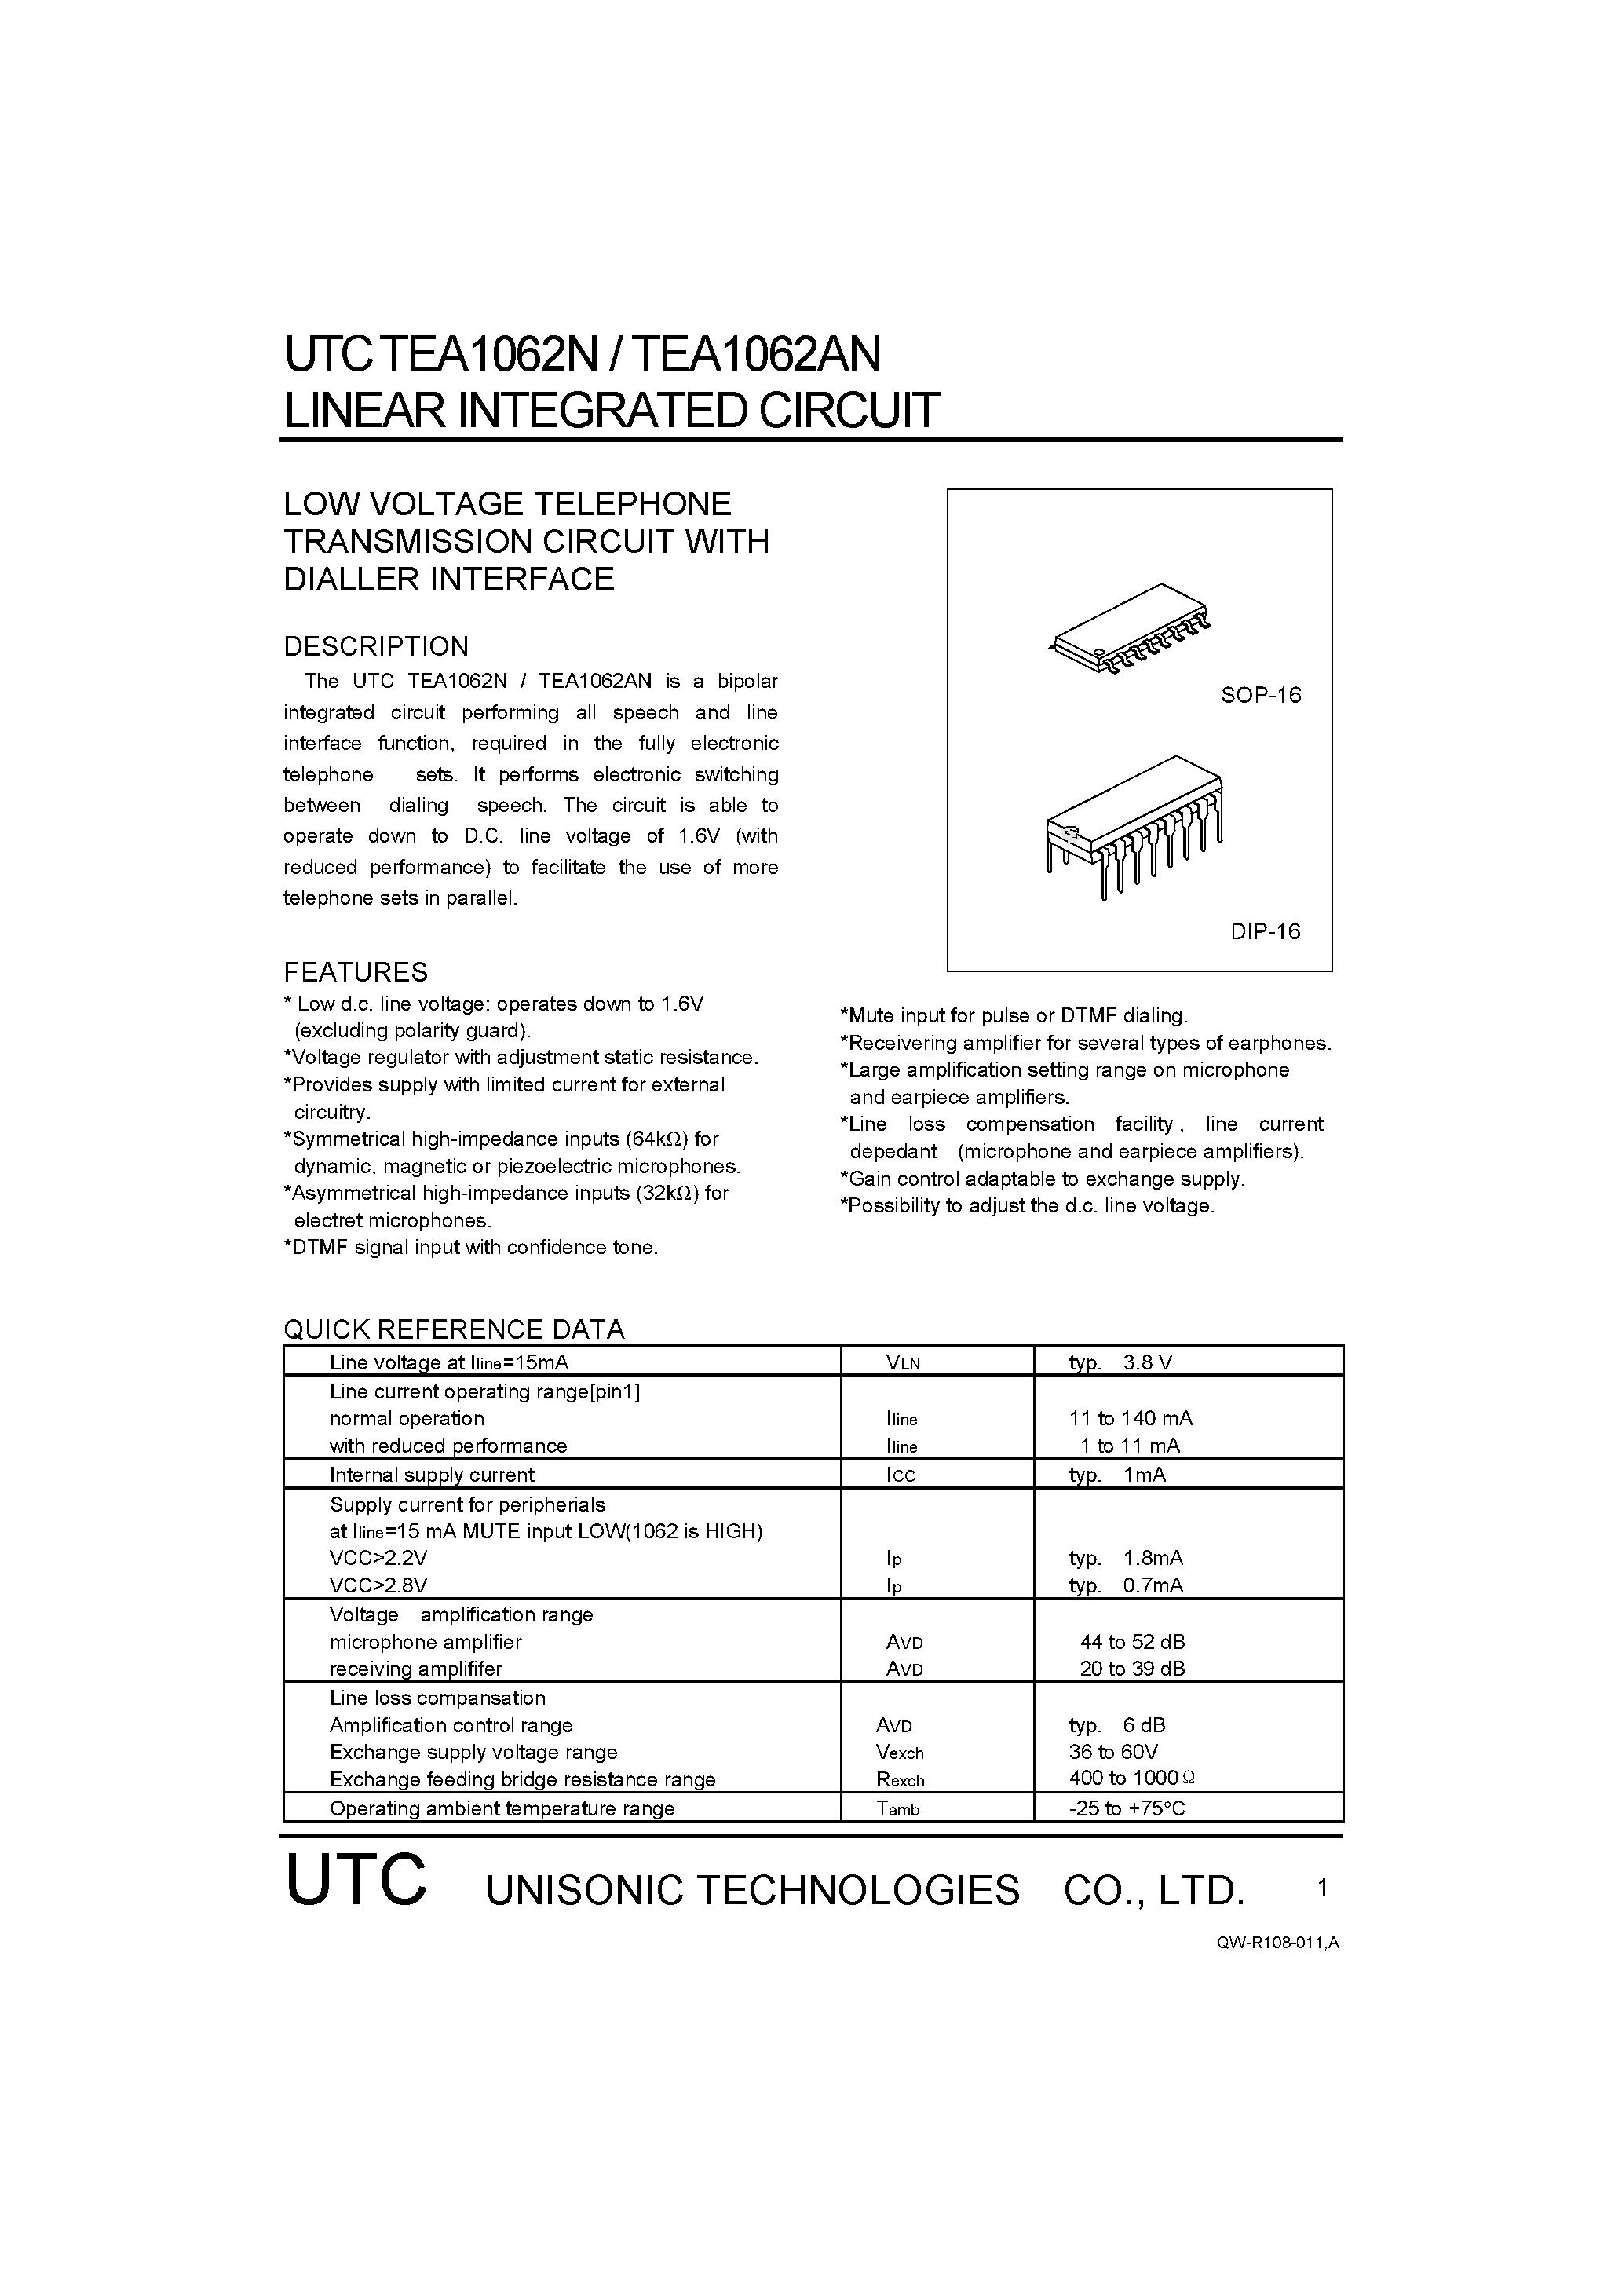 Datasheet TEA1062AN - LOW VOLTAGE TELEPHONE TRANSMISSION CIRCUIT WITH DIALLER INTERFACE page 1